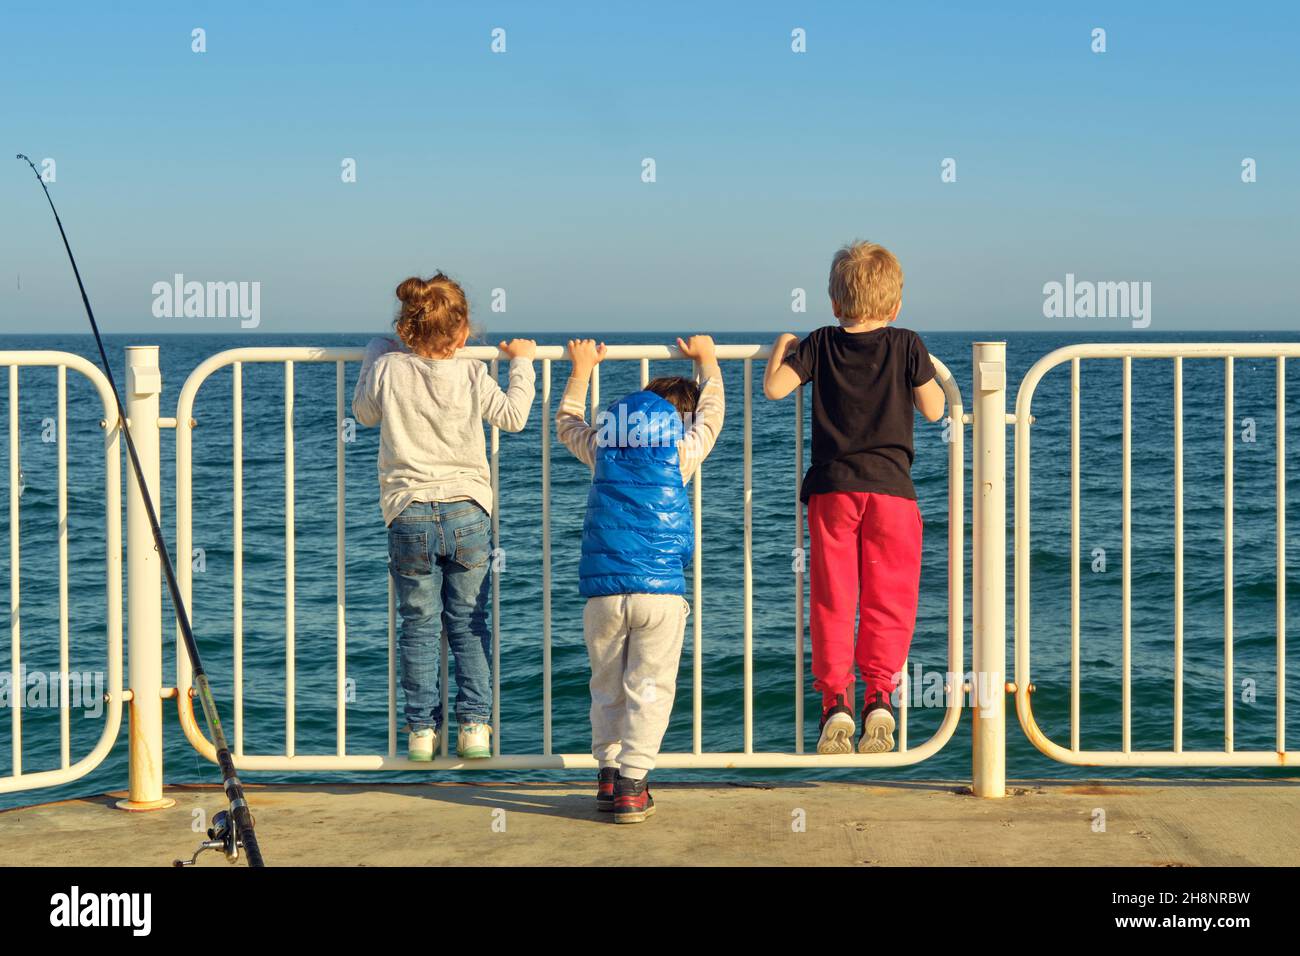 https://c8.alamy.com/comp/2H8NRBW/three-small-children-on-the-pier-have-cast-their-fishing-rod-and-gaze-at-the-surface-of-the-sea-2H8NRBW.jpg